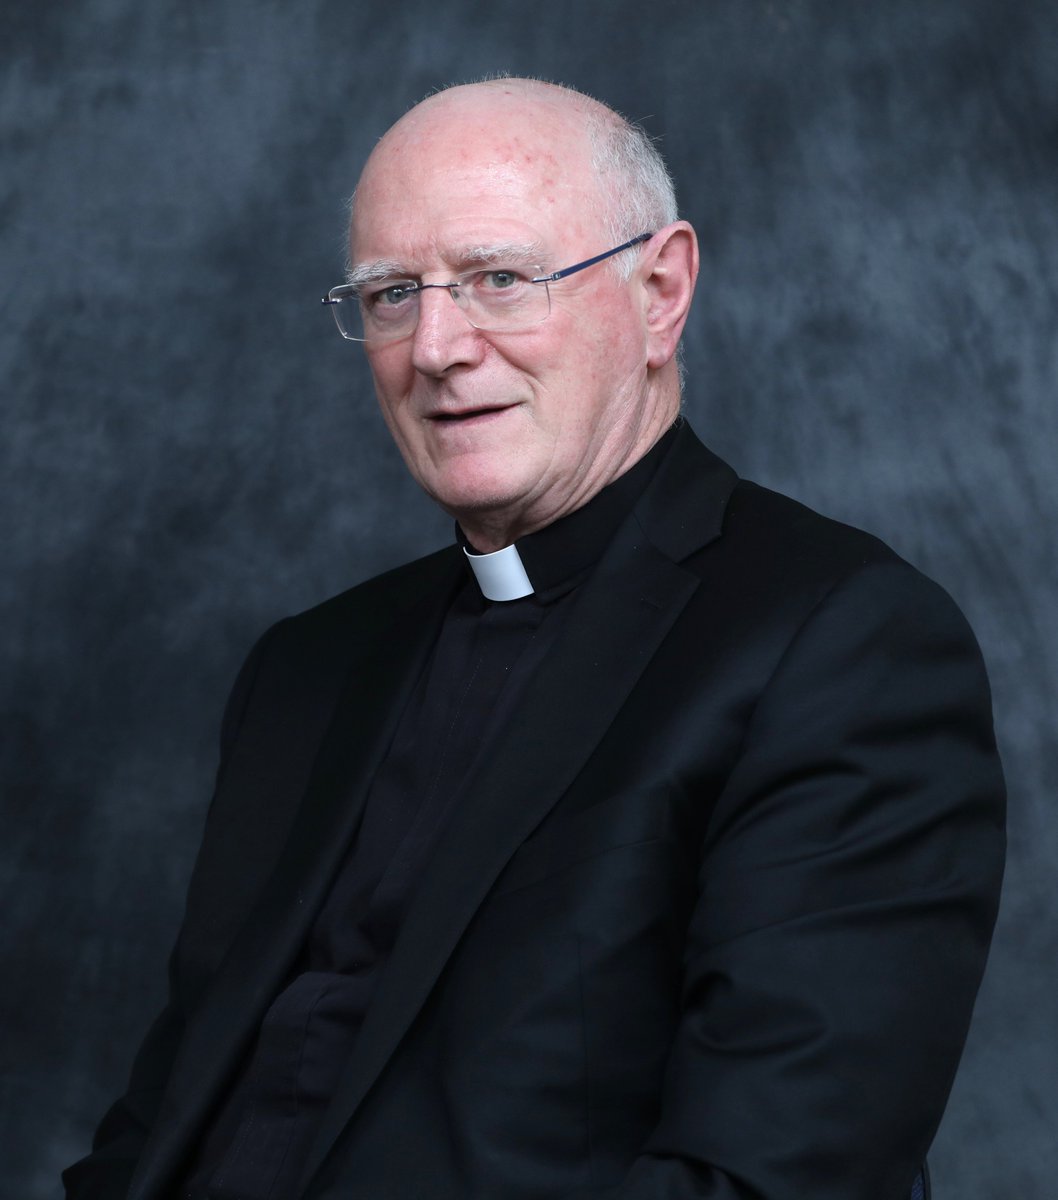 Statement of Archbishop Dermot Farrell on the appointment of @Bishop_Dempsey as Auxiliary Bishop of @dublindiocese Read Archbishop Farrell's statement⬇️ catholicbishops.ie/2024/04/10/sta…